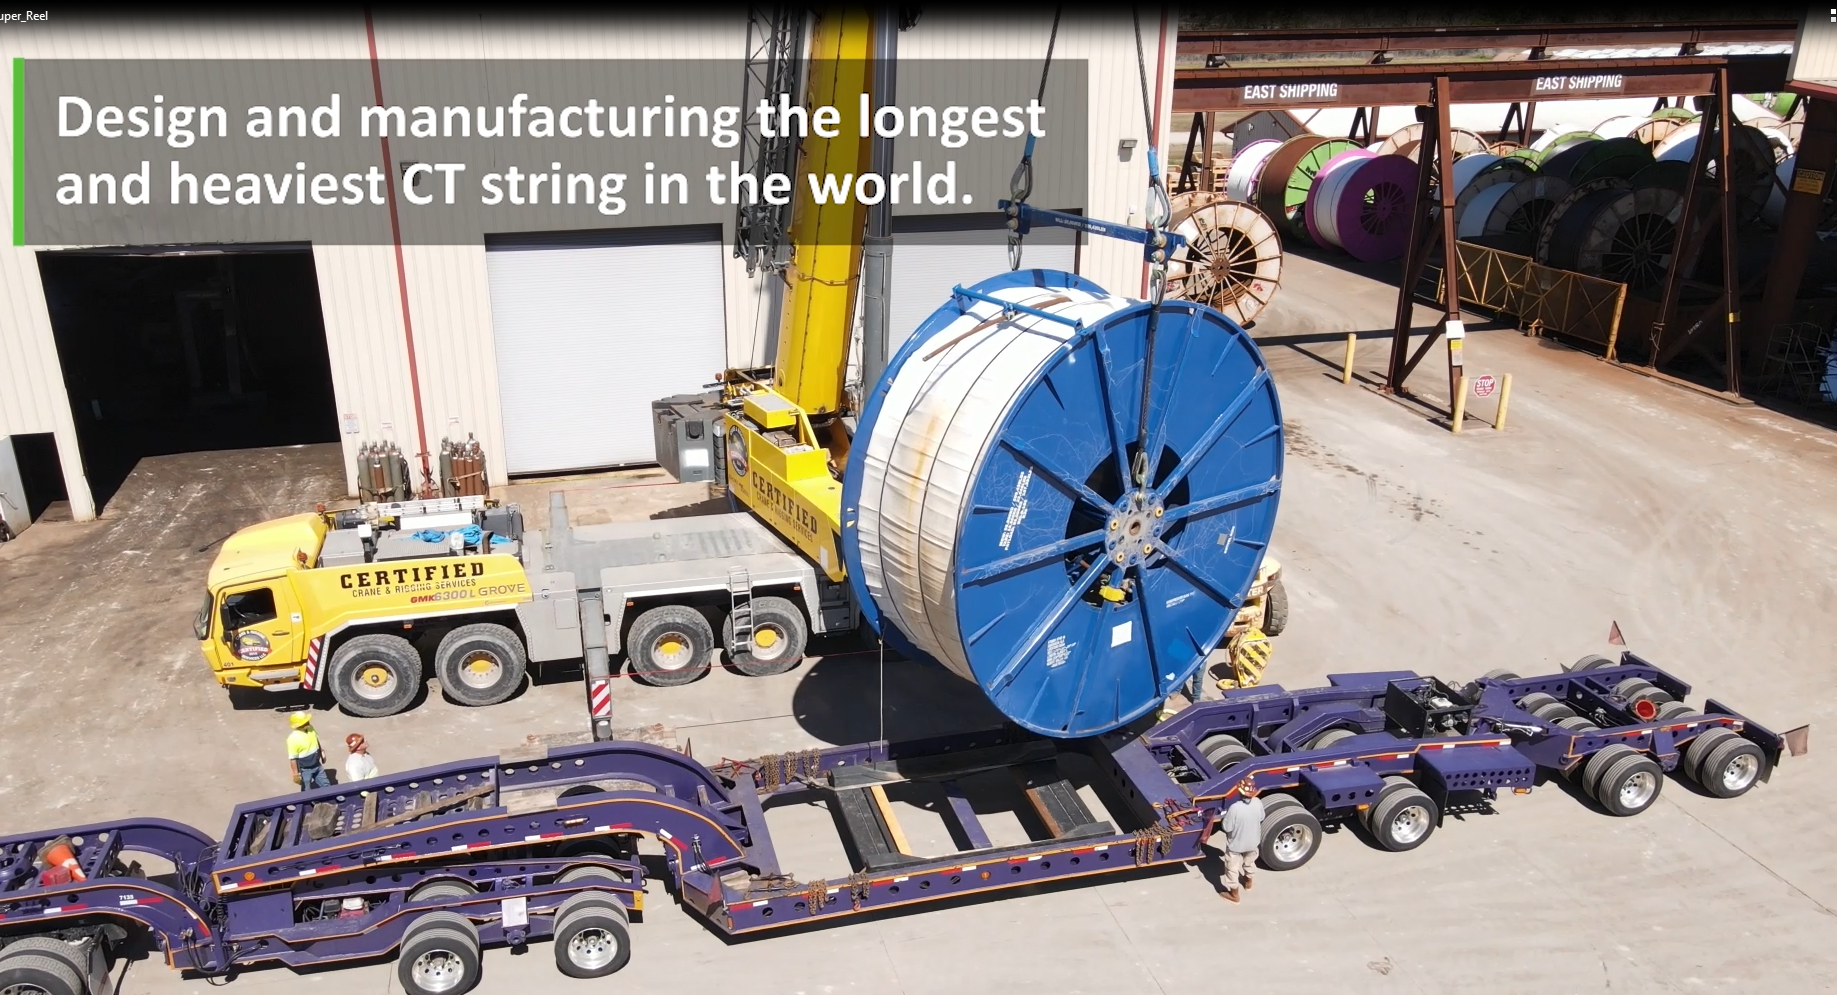 Global Tubing designs and manufactures the record-breaking string